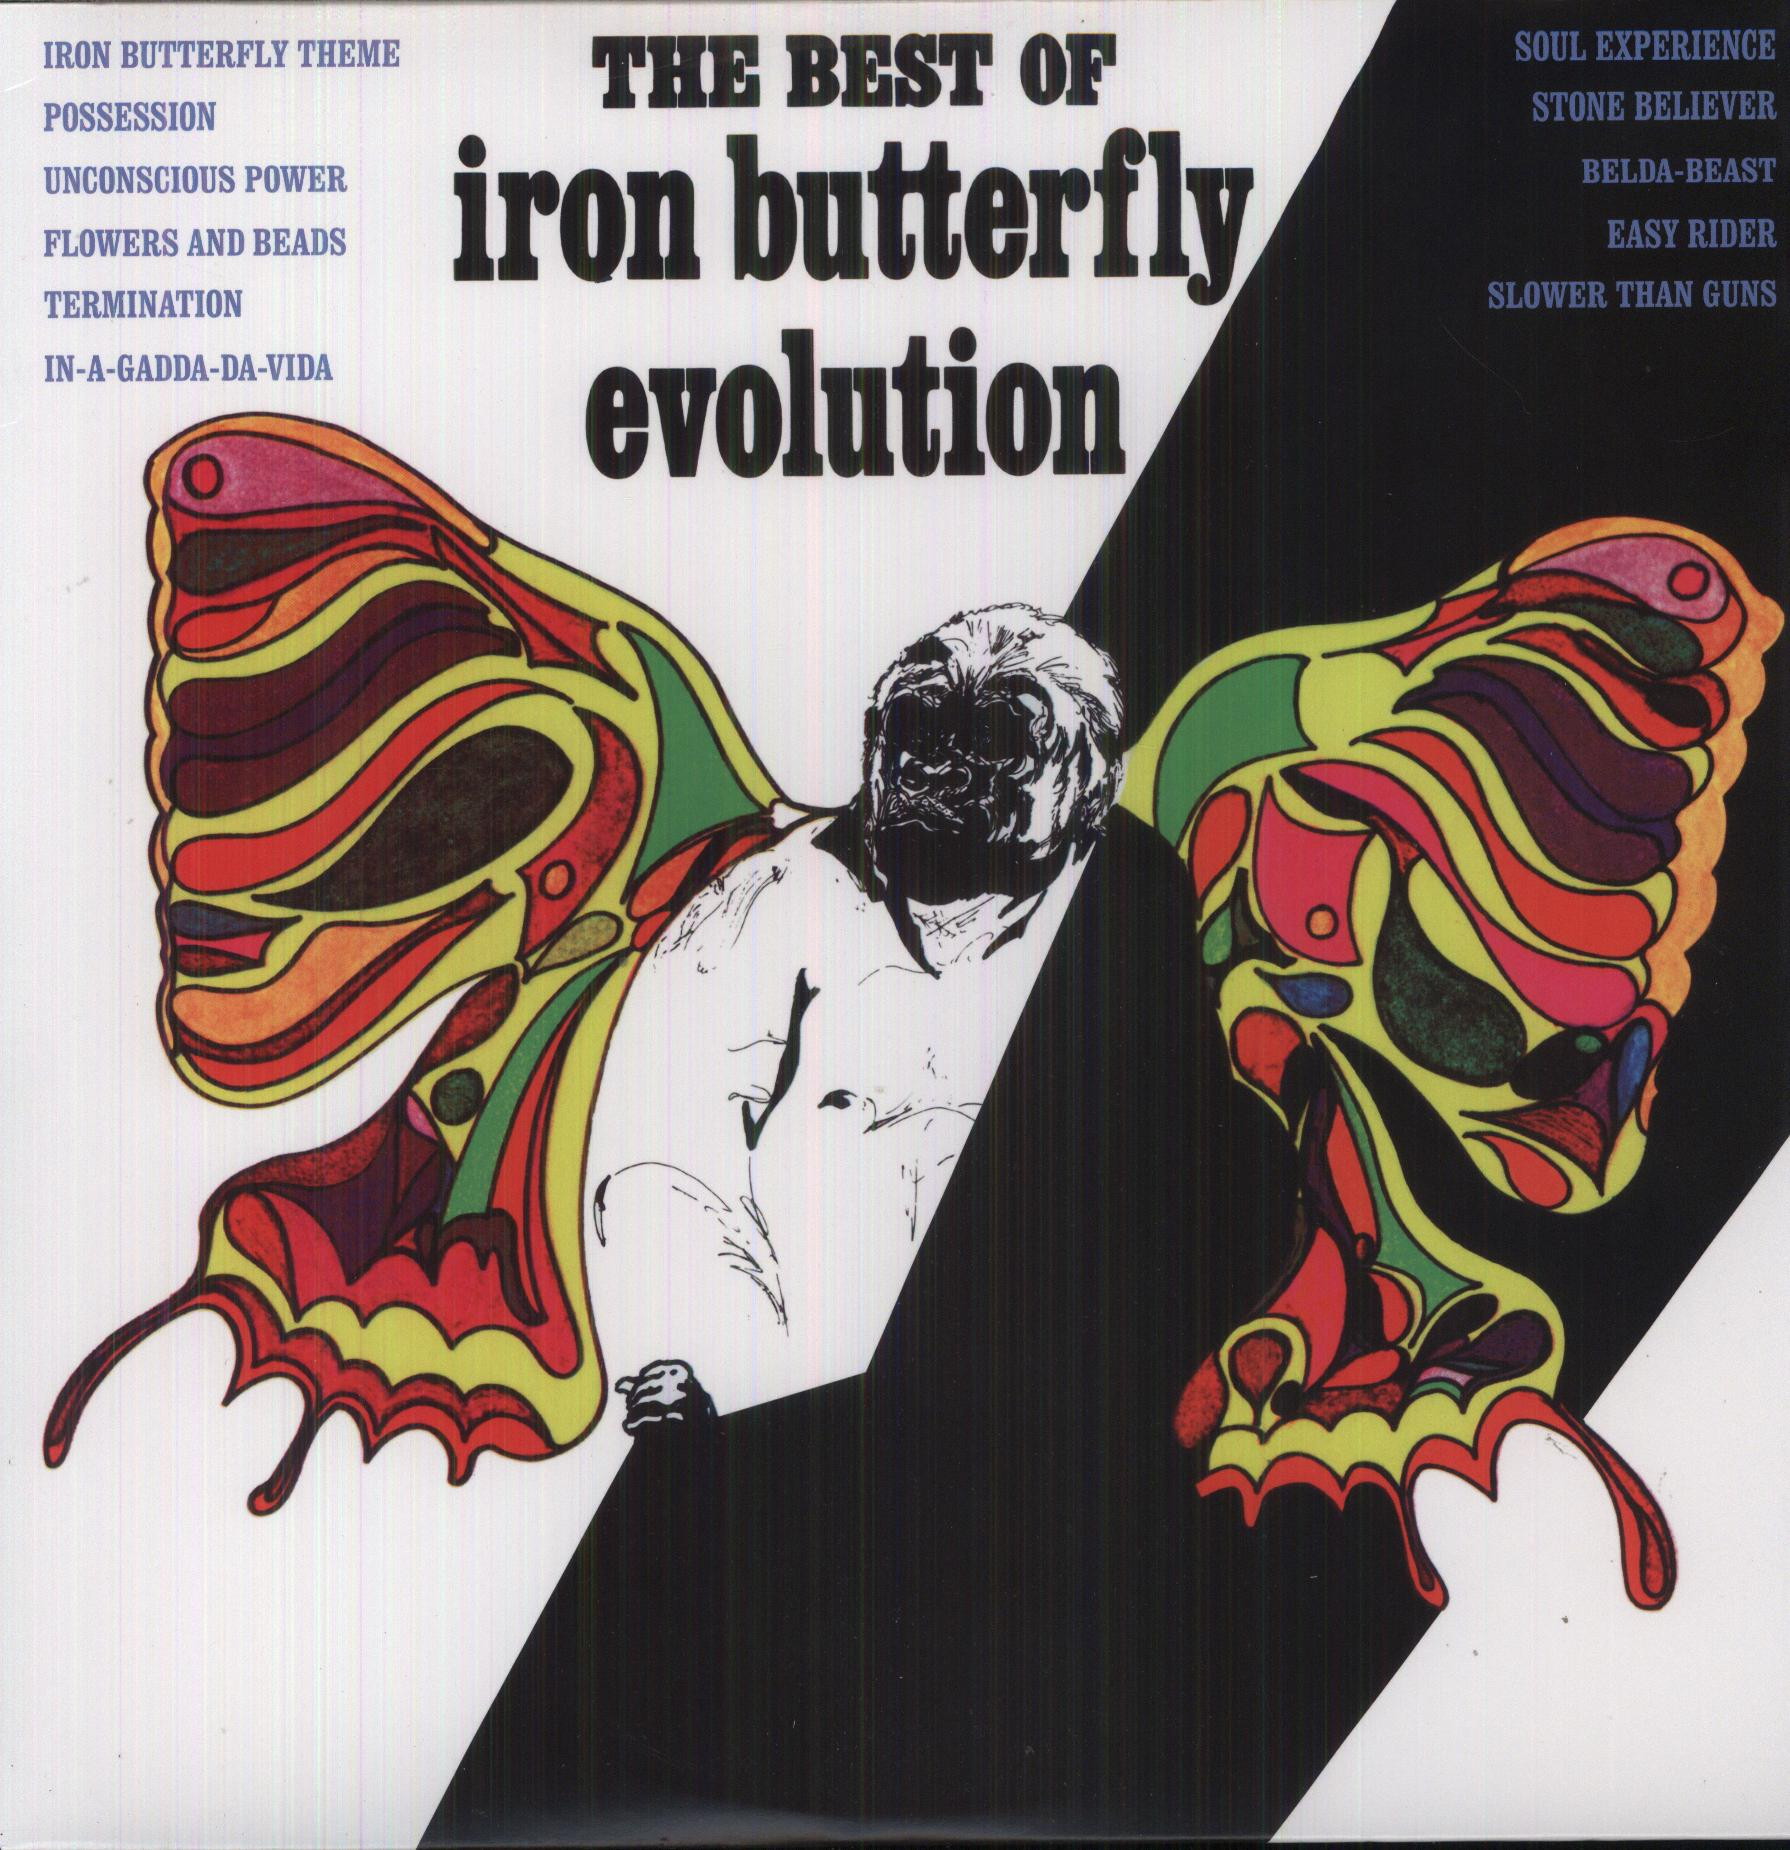 EVOLUTION: THE BEST OF THE IRON BUTTERFLY (LTD)